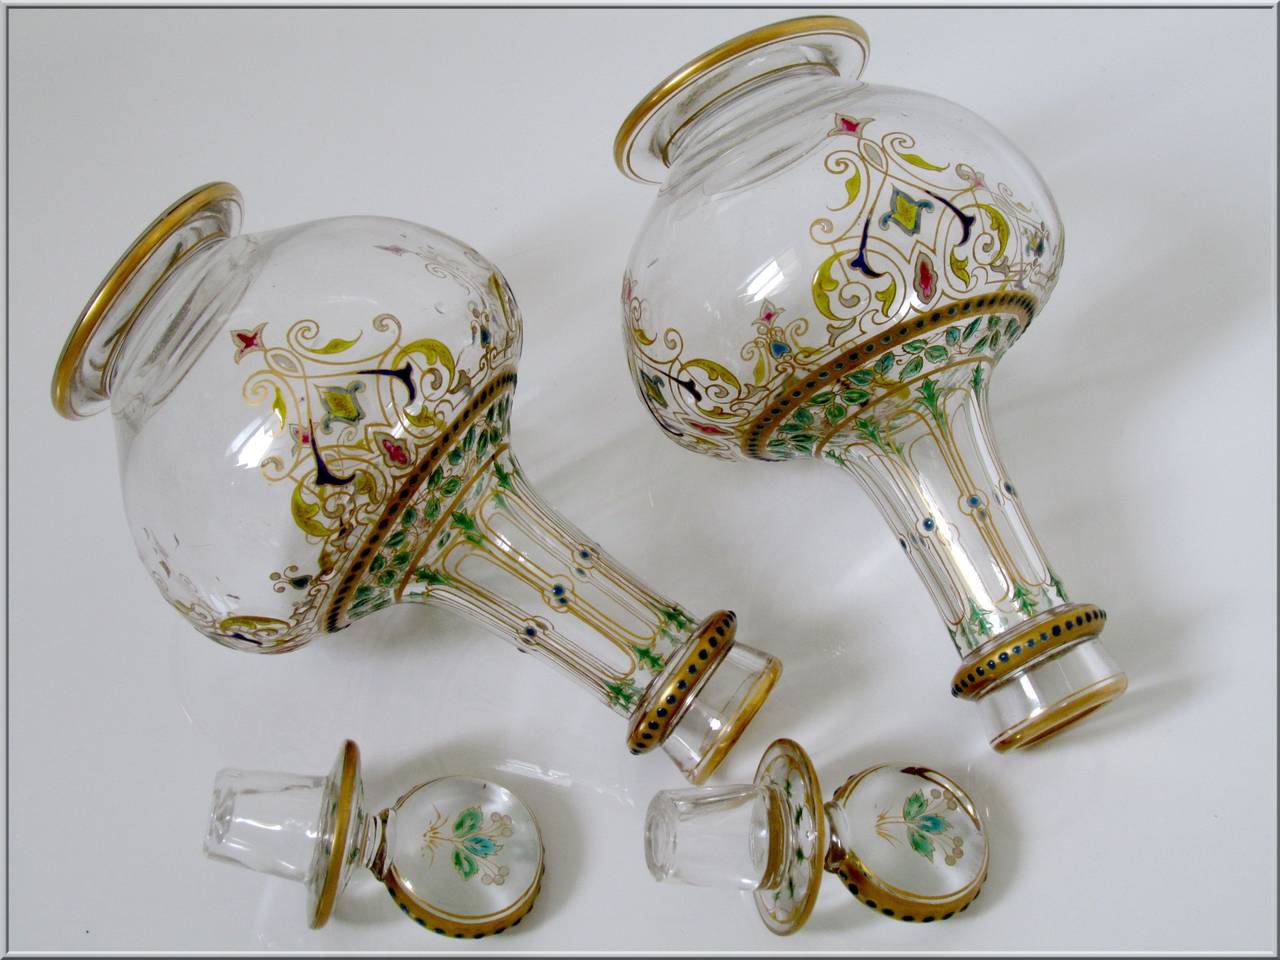 Women's or Men's 1870s Exceptional French Baccarat Enameled Crystal Liquor Service